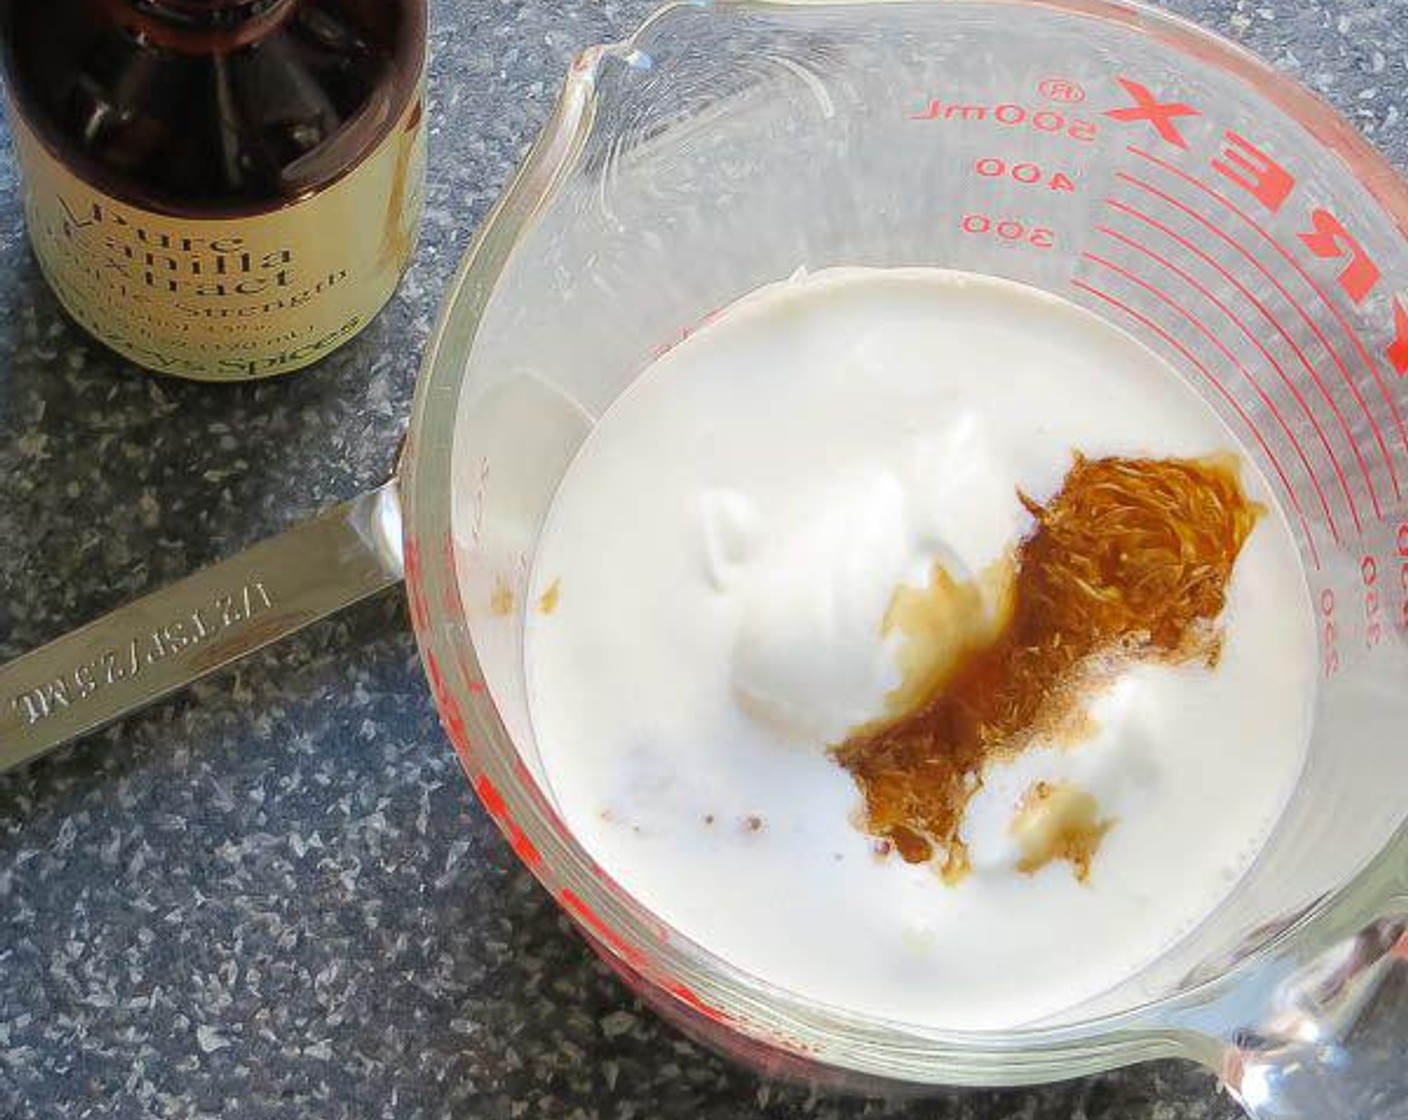 step 5 In a glass measuring cup, add the Whipping Cream (1/2 cup). Drop spoonfuls of the Sour Cream (1/2 cup) into the whipping cream until it measures 1 cup. Add the Vanilla Extract (3/4 tsp) and whisk to combine. Set aside.